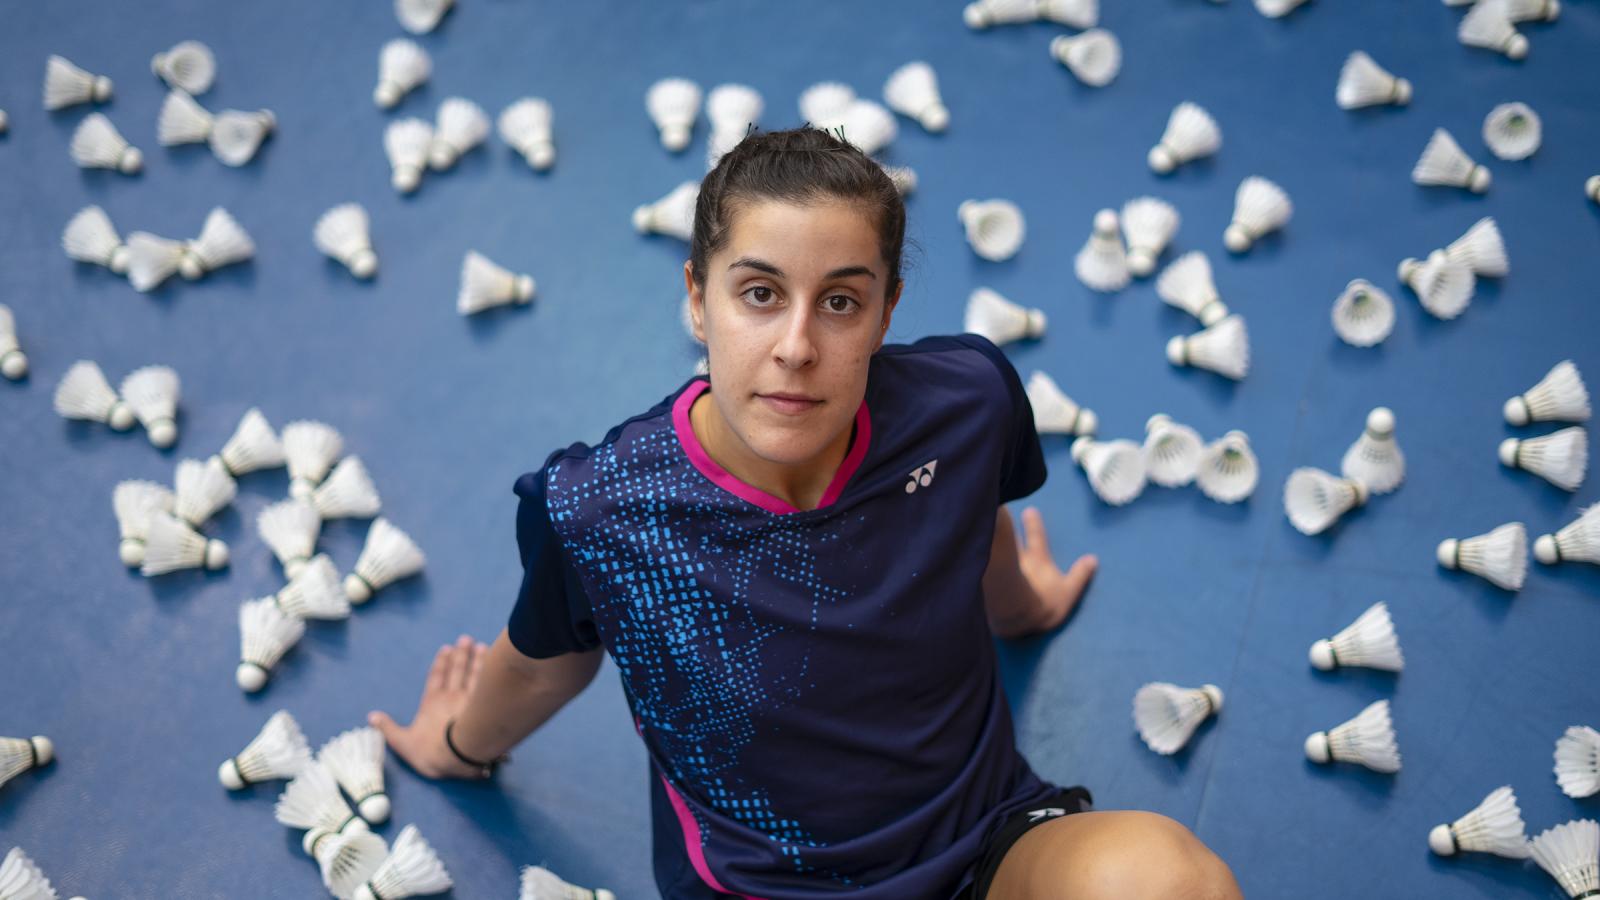 Image from Overview - Portrait of Olympic badminton champion Carolina...